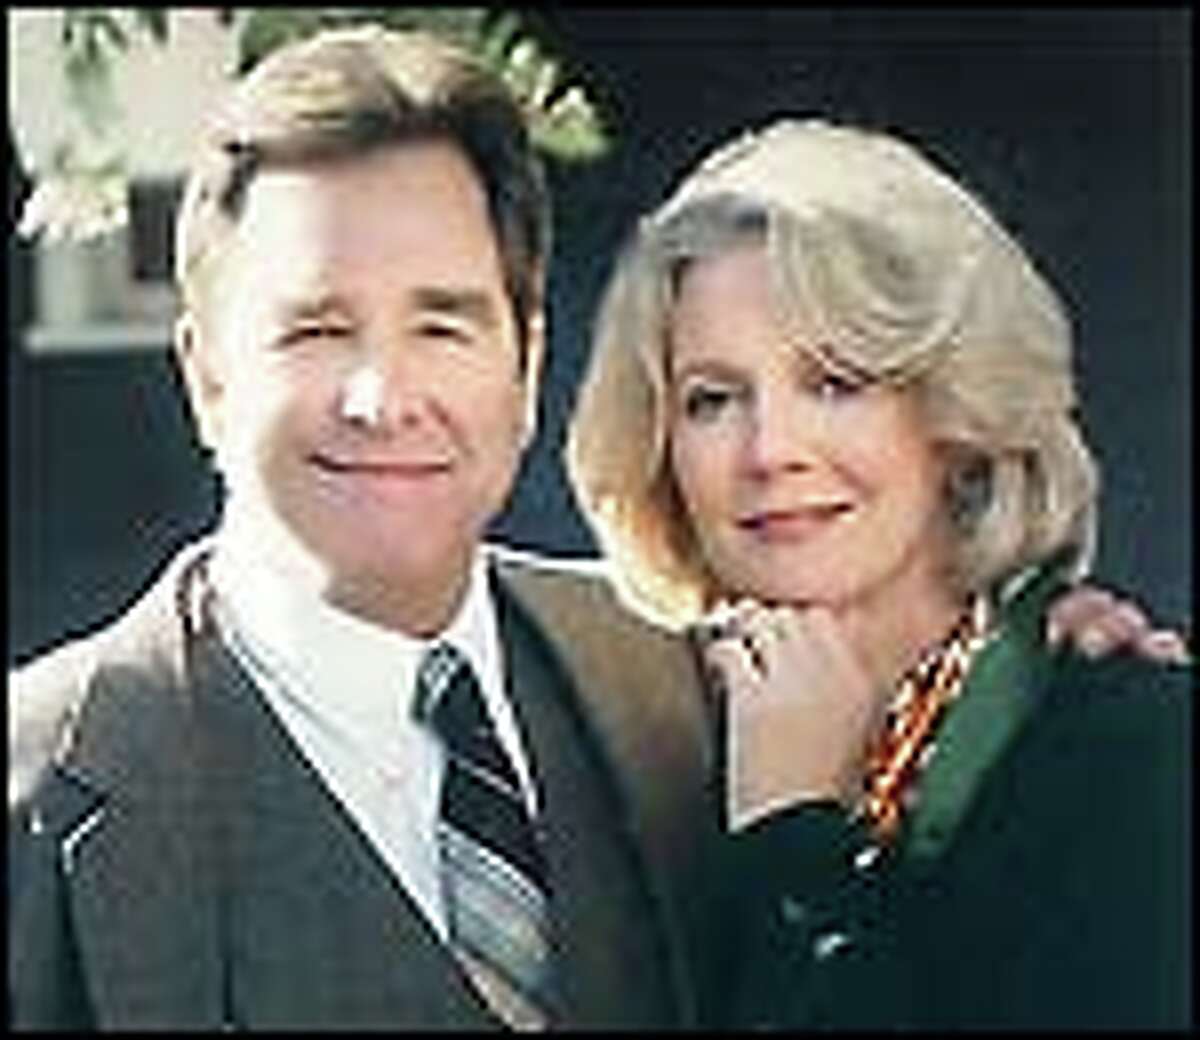 Beau Bridges and Blythe Danner play parents whose idyllic life collapses after the rape of their daughter, and must choose between devotion to each other or their children.